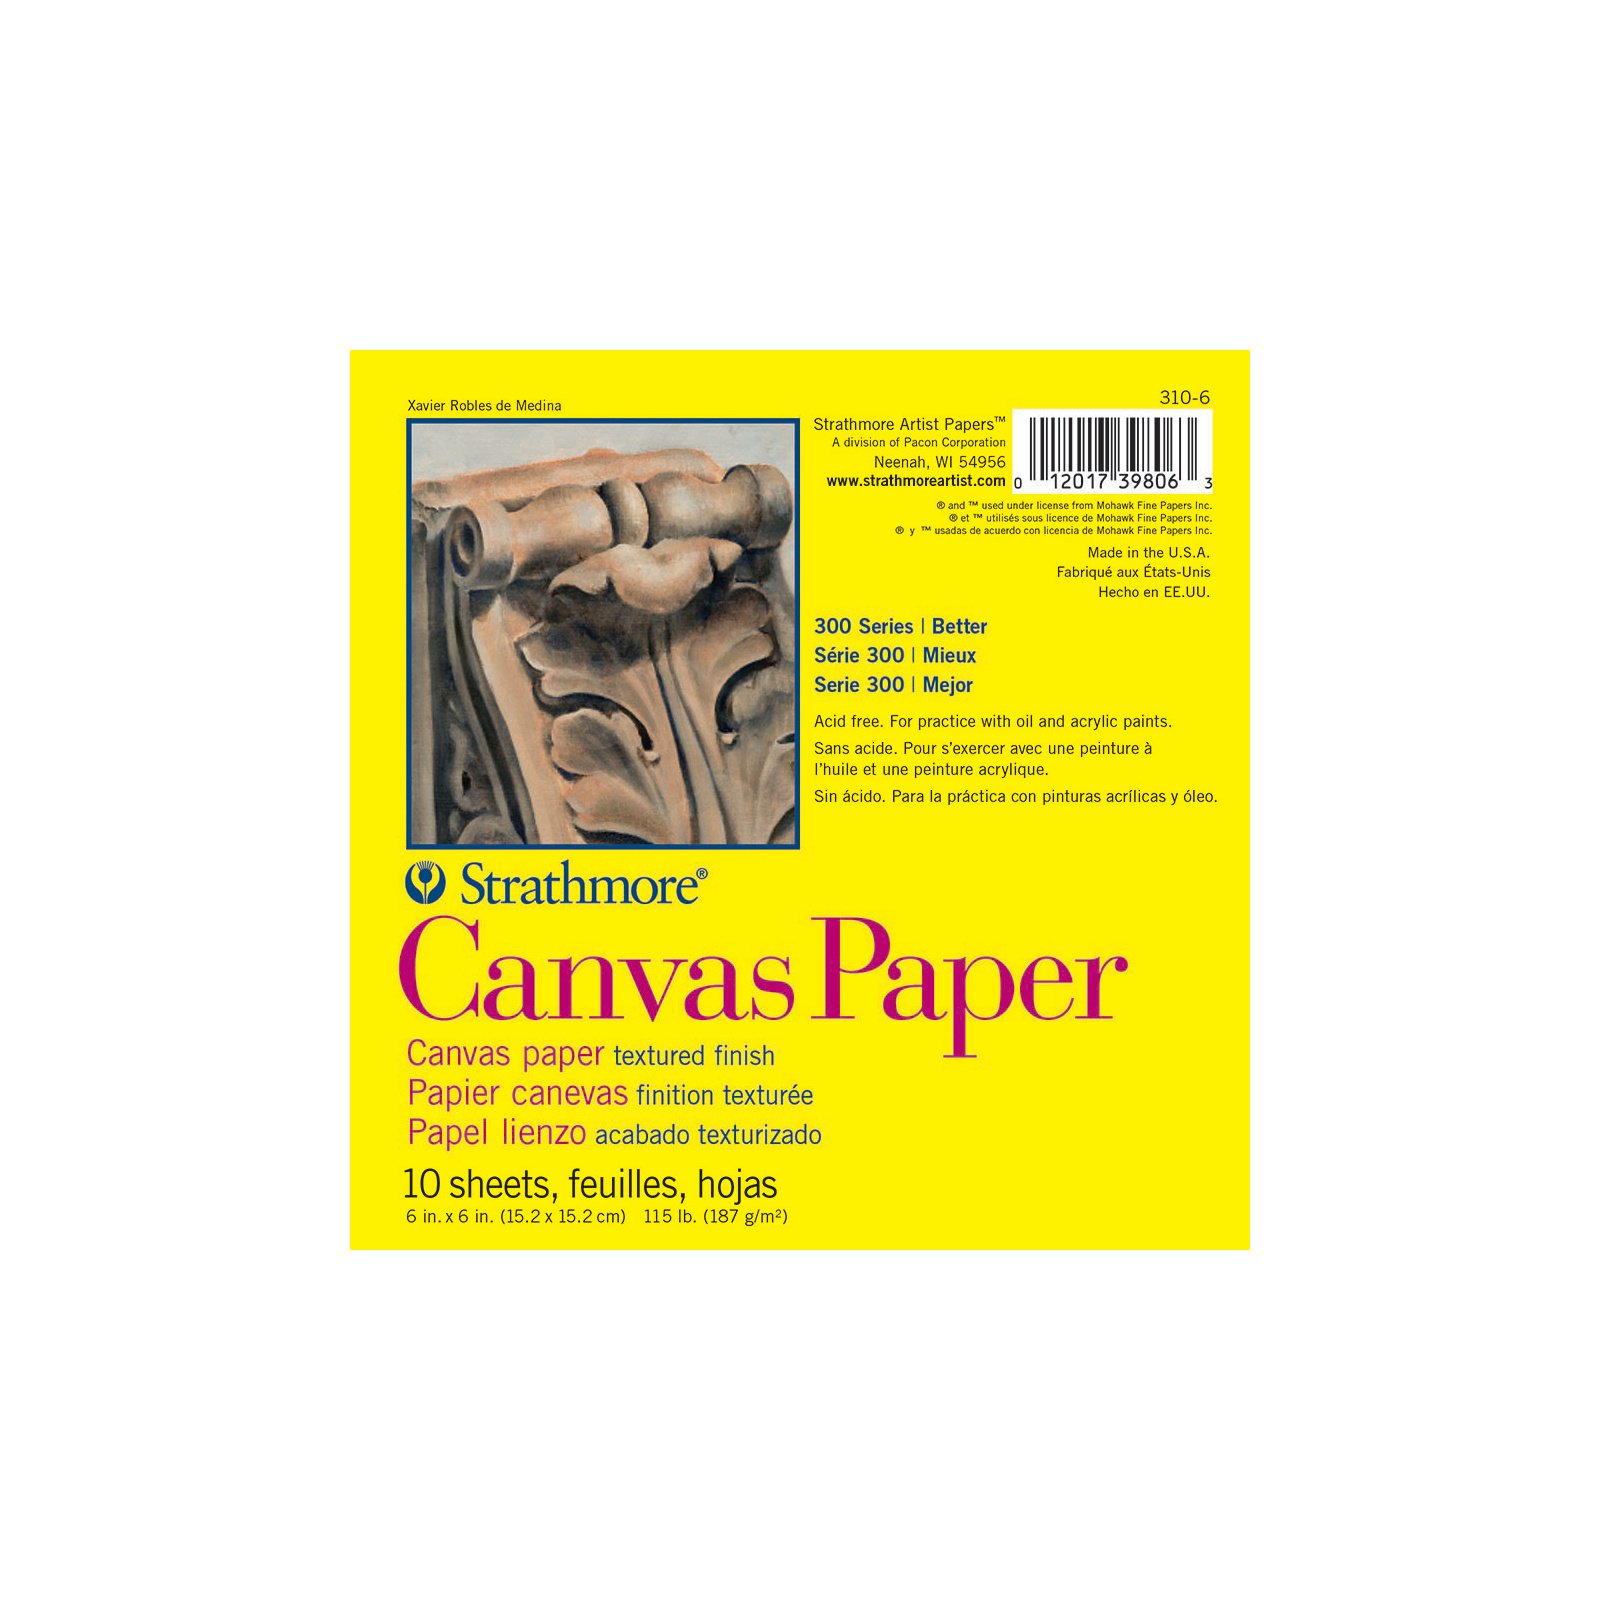 Strathmore Canvas Paper Pads 300 Series, 6" x 6"